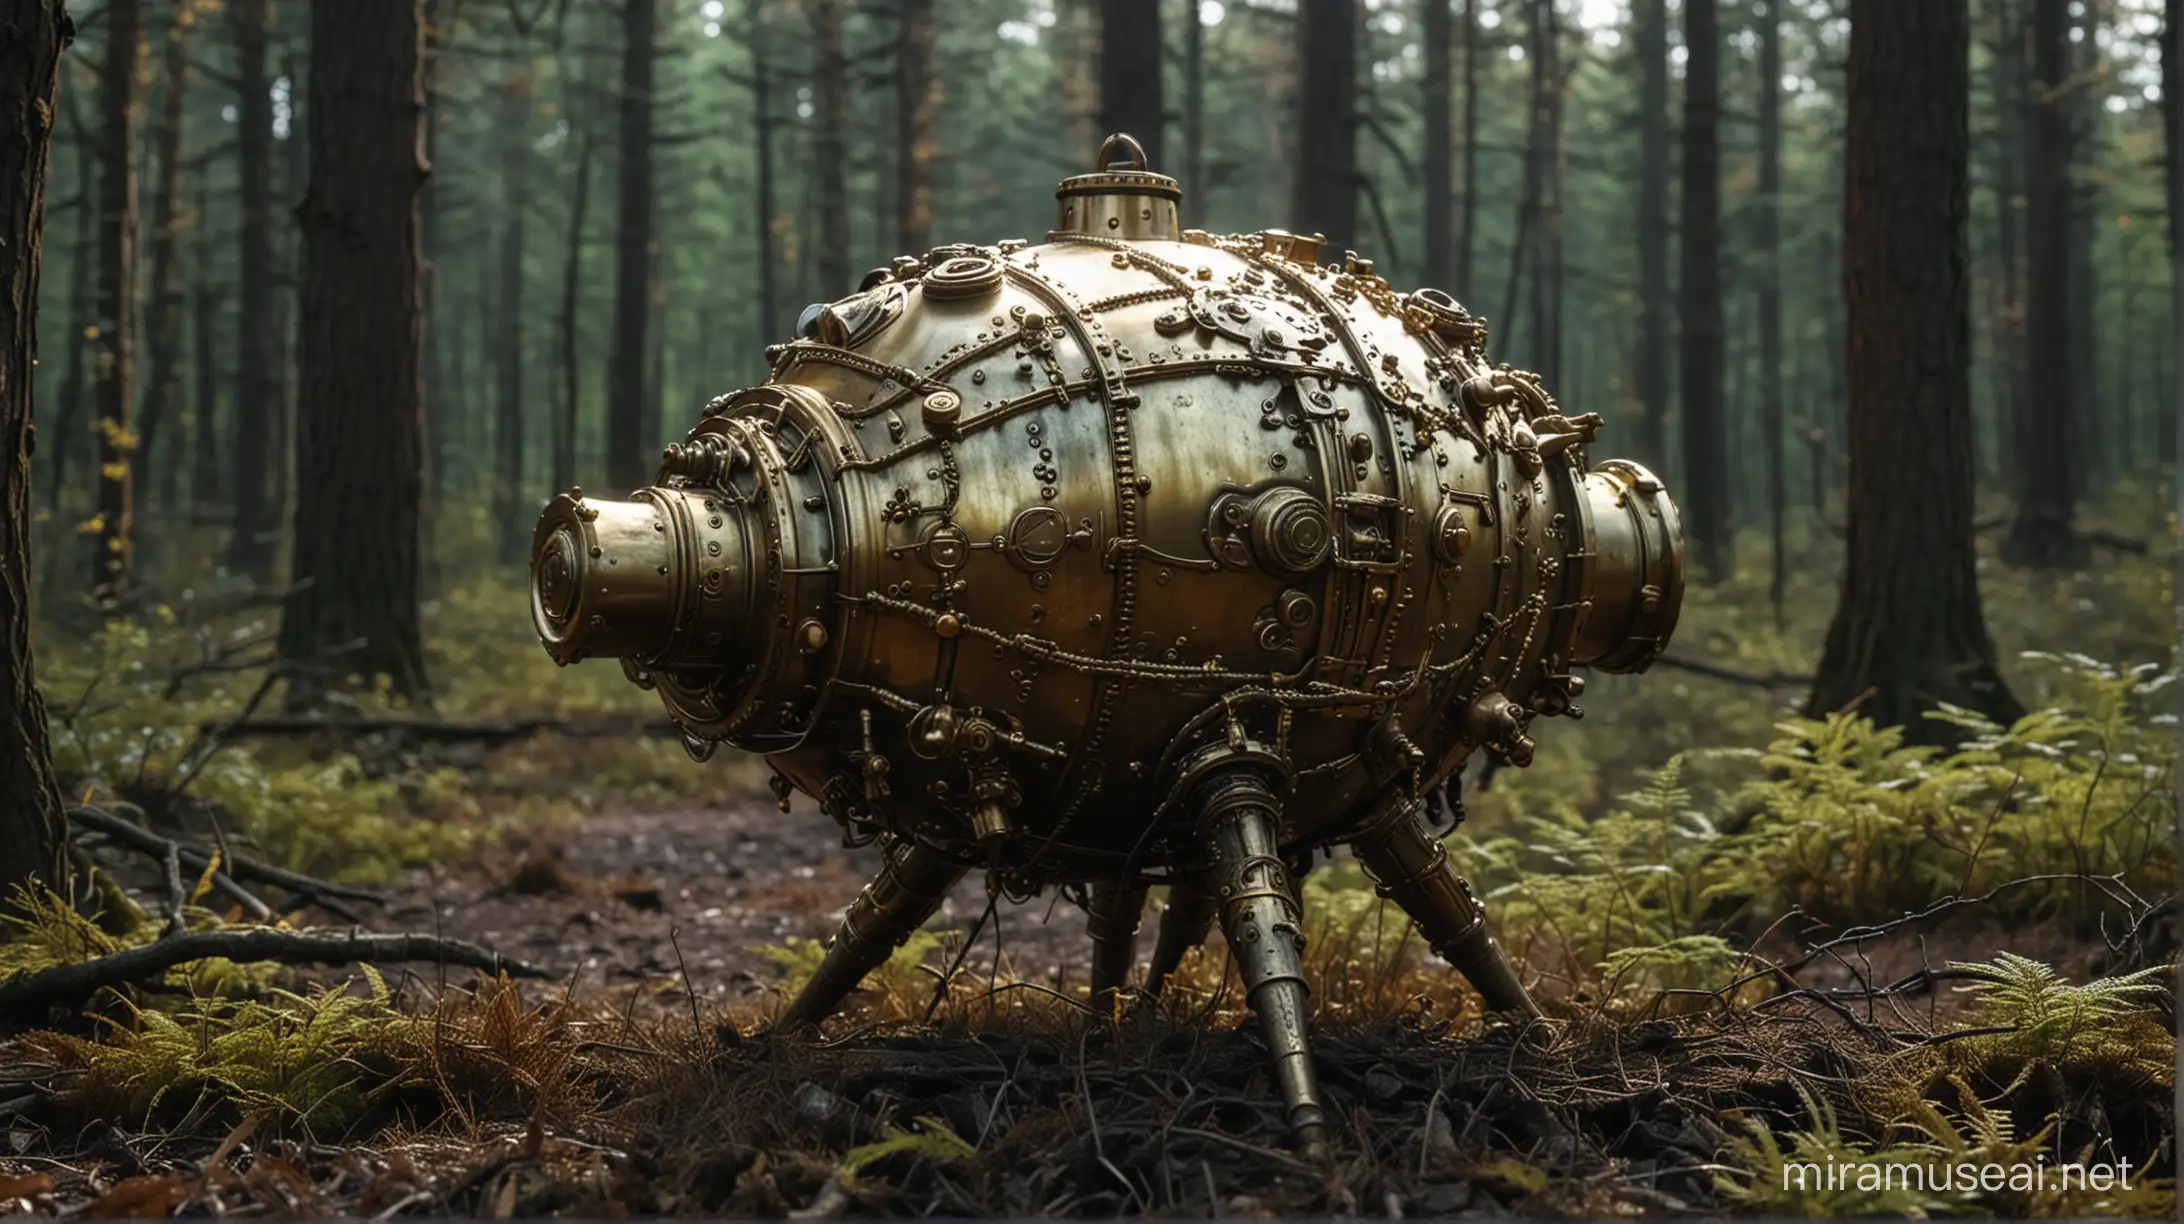 Glistening Gold Steampunk Artifact Discovered in Forest Clearing